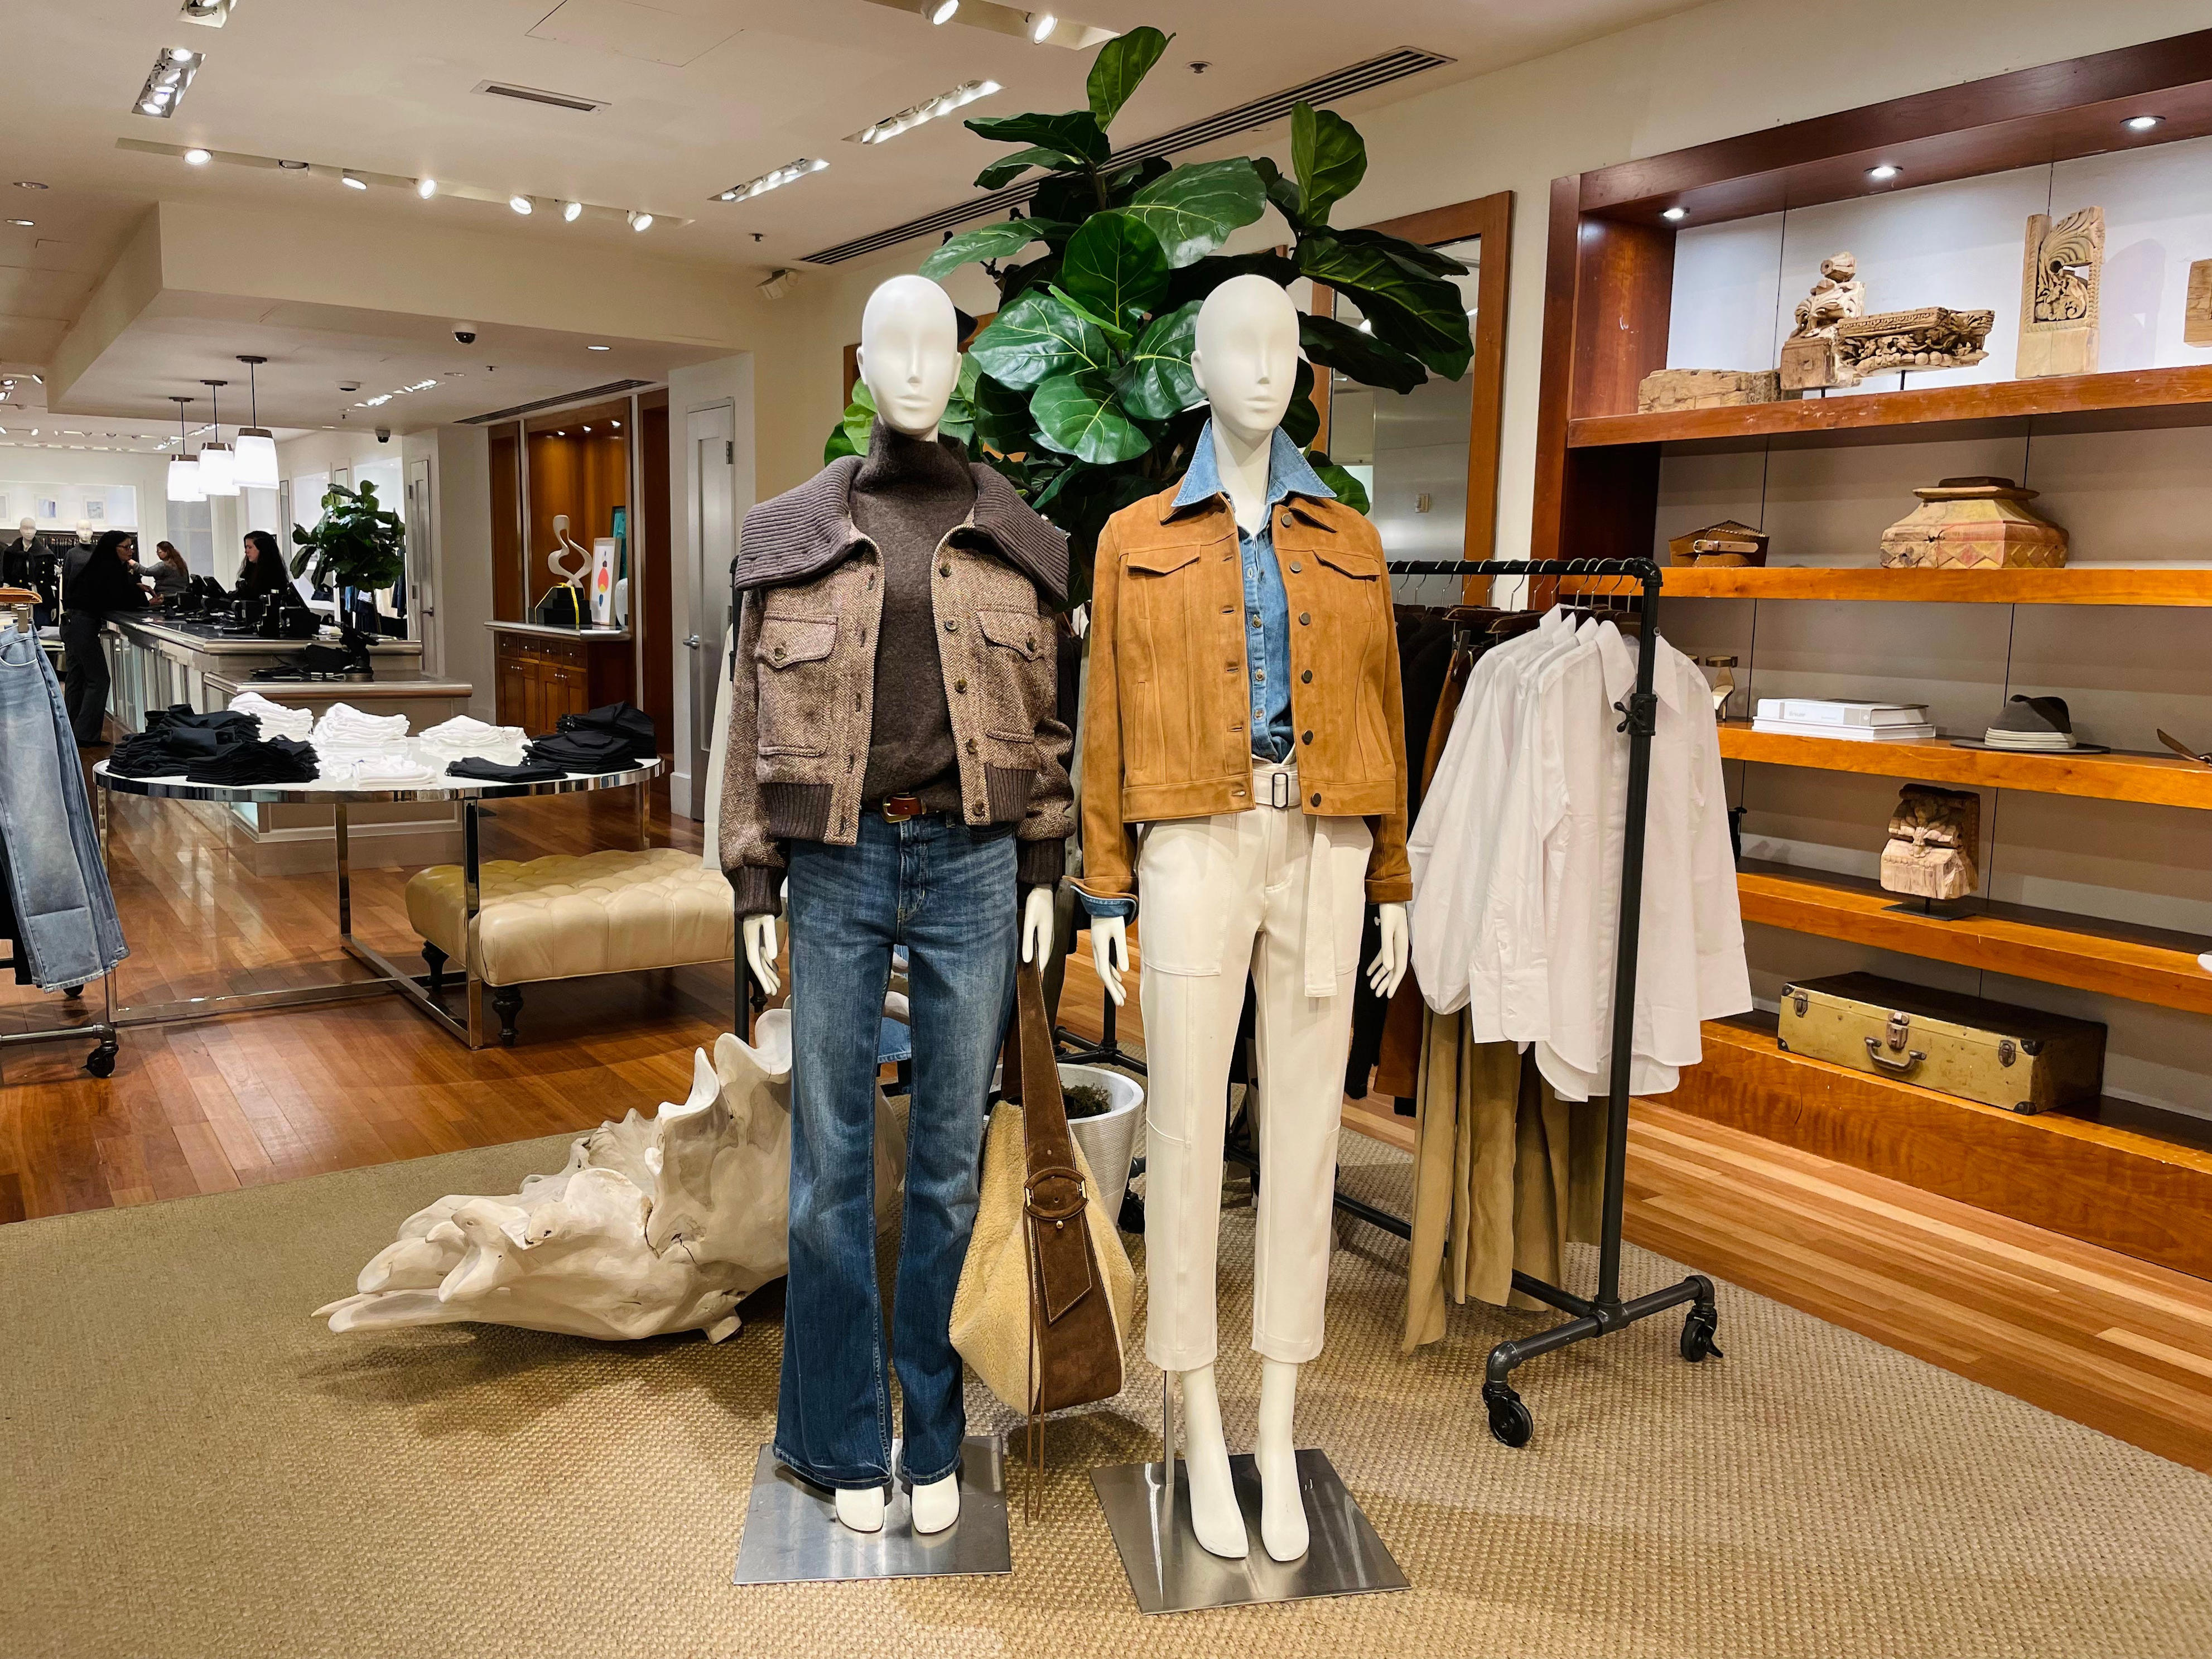 <p>If Banana Republic wants to tap into the quiet-luxury market, they'll need to start by improving the quality of their basics. There were also some strange style choices that they'll have to refine.</p><p>The pieces that stood out to me most were more luxury-leaning, like the $2,500 shearling coat and a $380 bucket purse.</p><p>I would consider buying a couple timeless staples at Banana Republic or investing in a single splurge item like a coat or handbag, but the brand wouldn't be the first on my list for a closet refresh.</p>